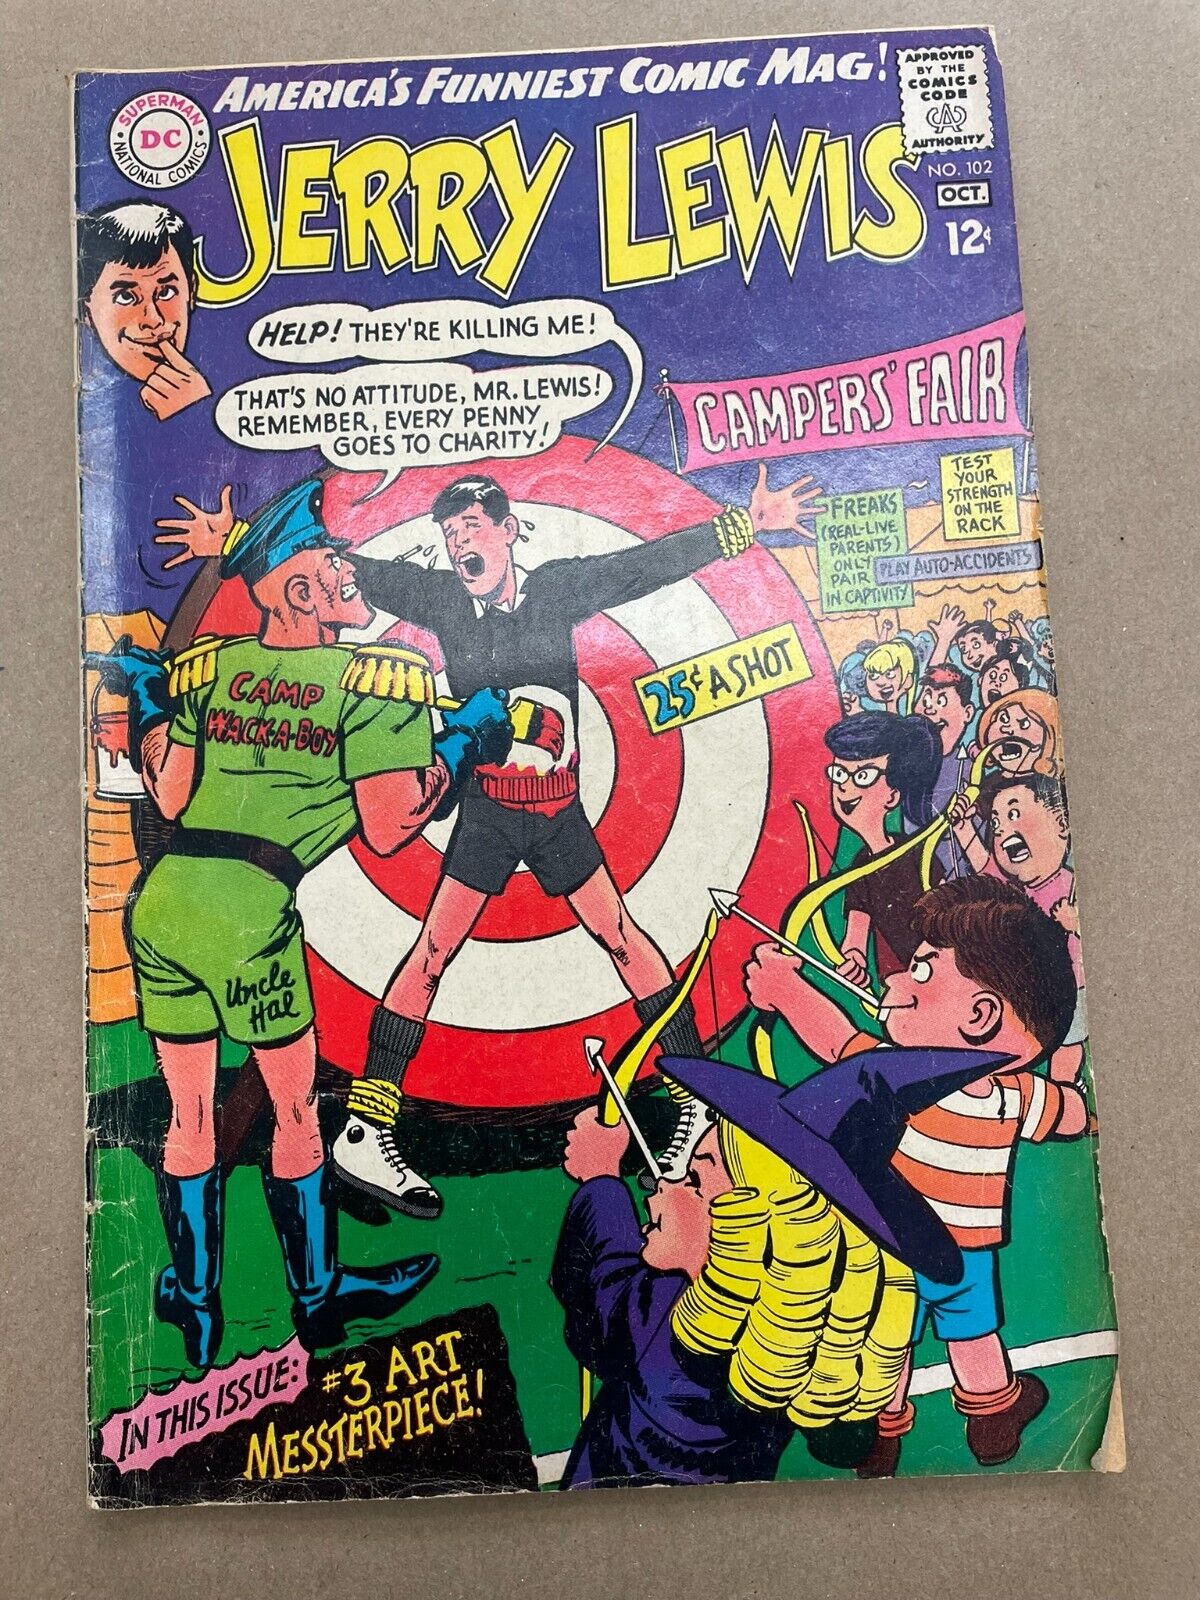 The Adventures of Jerry Lewis #102 (DC Comics Silver Age 1967) **RARE**